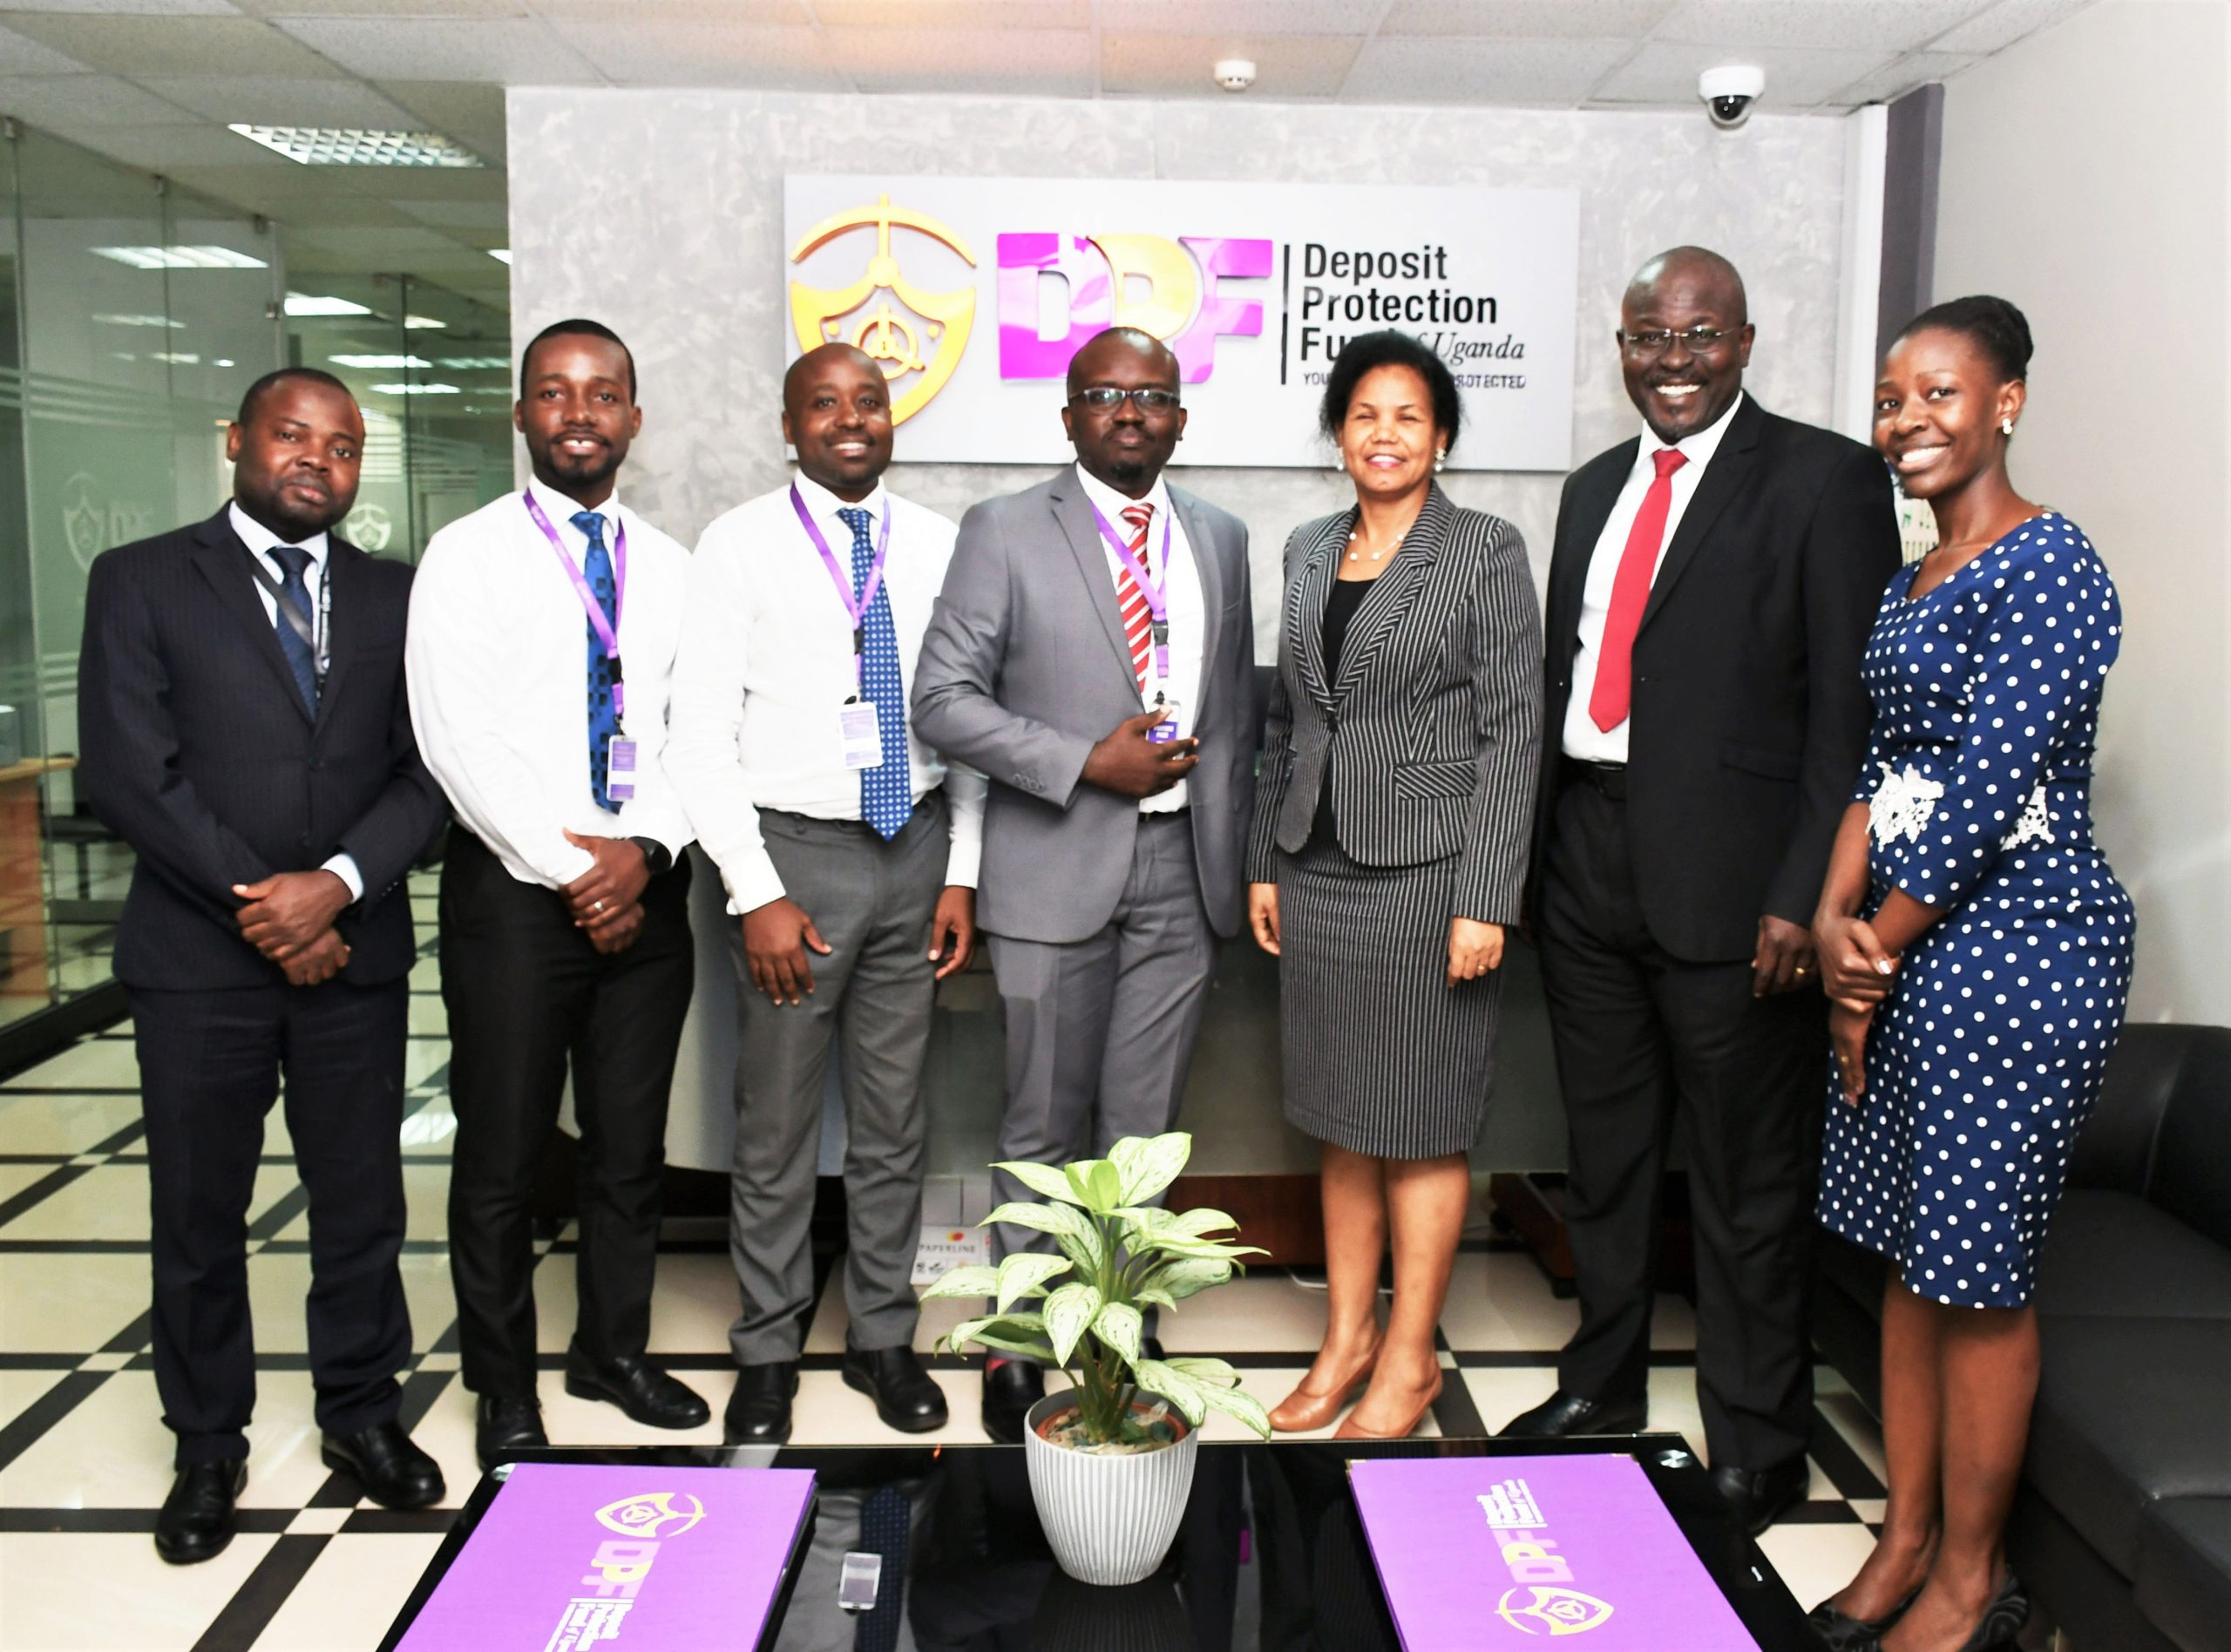 ABSA Bank Pays A Courtesy Visit To The Deposit Protection Fund Of Uganda – September 4, 2023